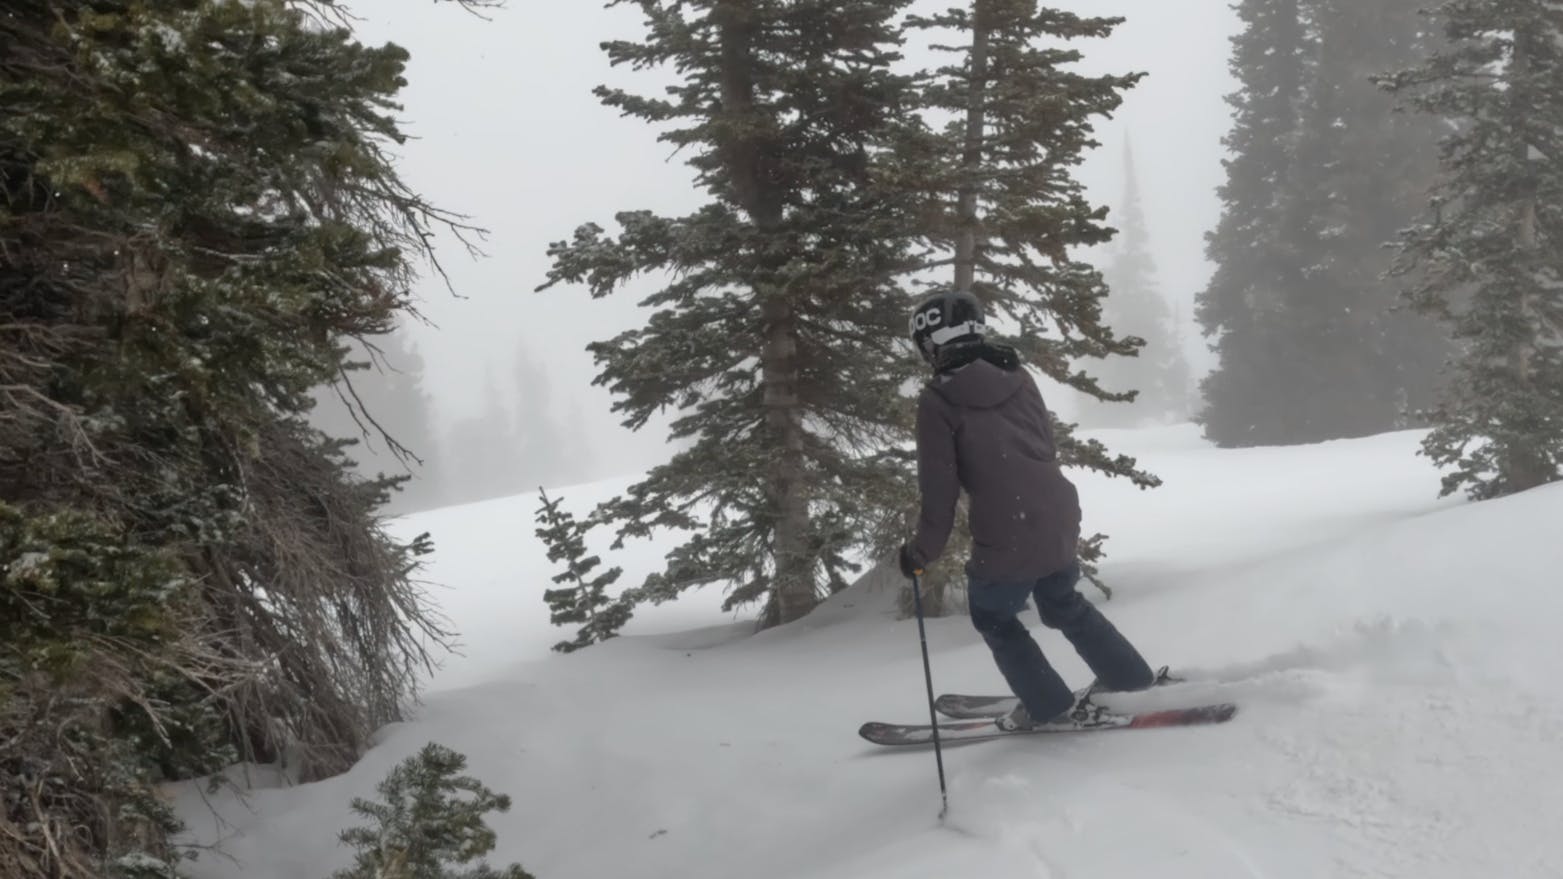 Curated Ski Expert Jessica Whittam skiing the 2023 Atomic Maven 86 skis in the trees in foggy conditions